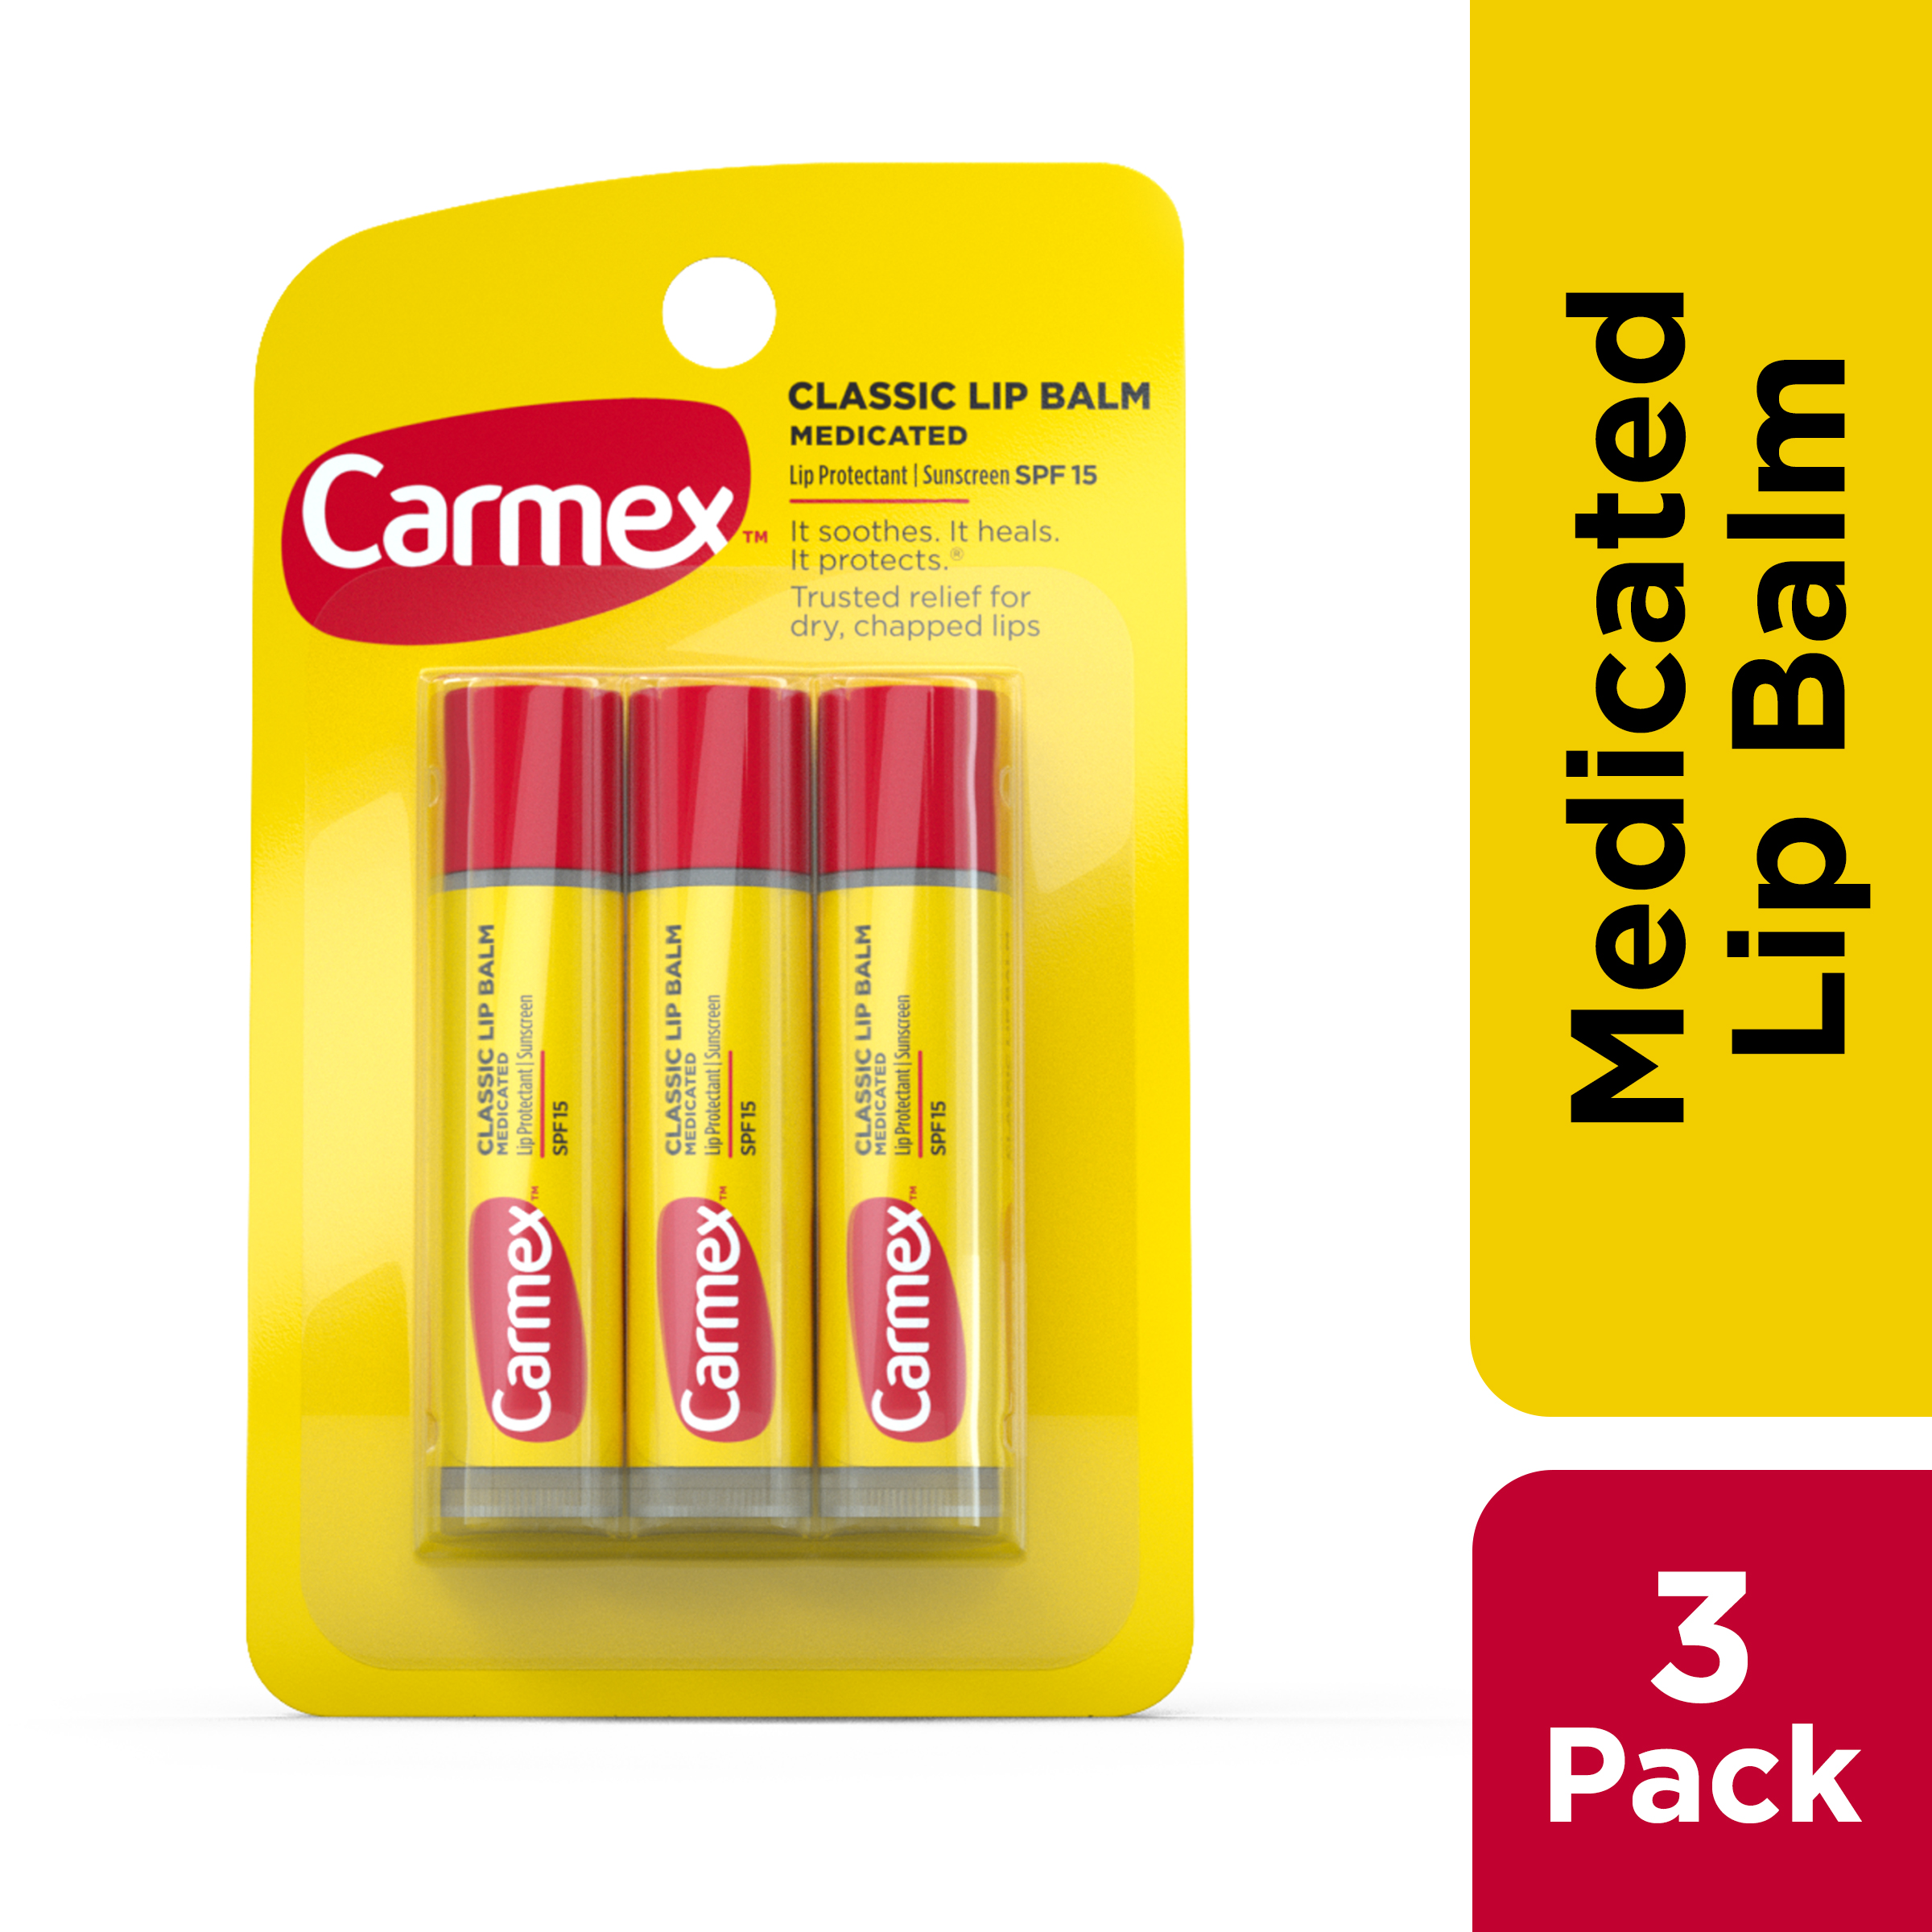 Carmex Classic Medicated Lip Balm Sticks, Lip Moisturizer, SPF 15, 3 Count (1 Pack of 3) - image 1 of 11